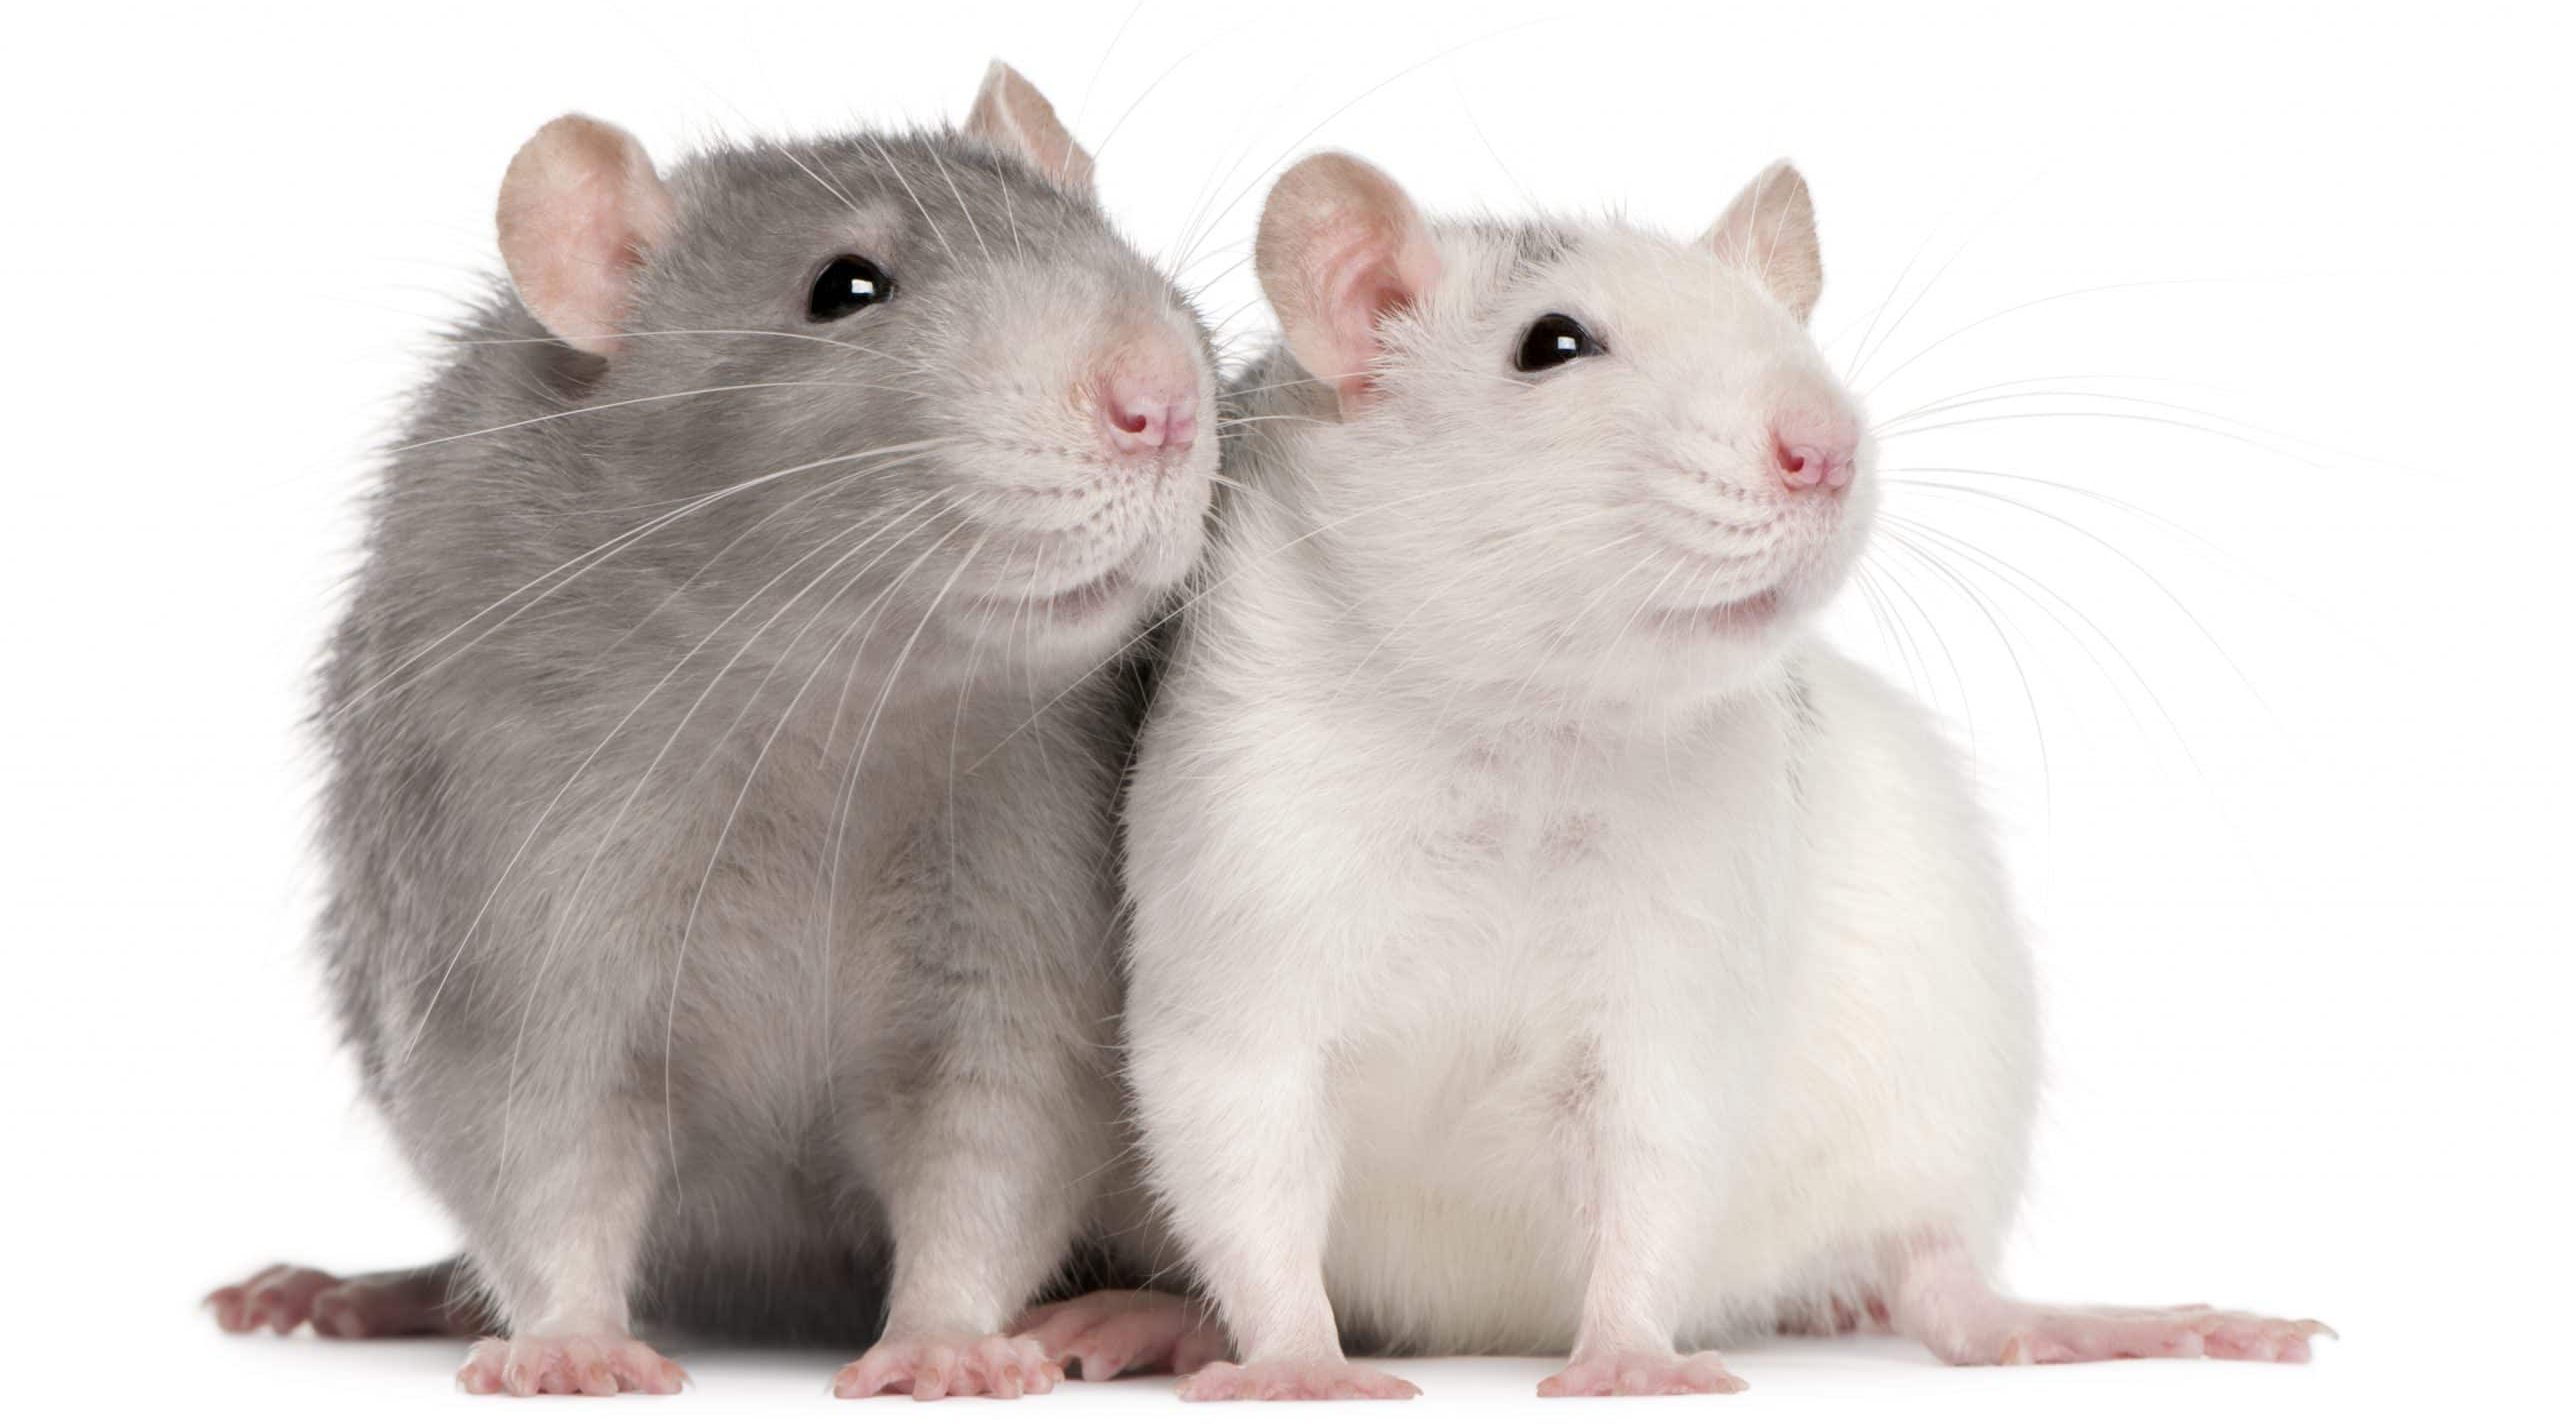 Two rats, 12 months old, in front of white background